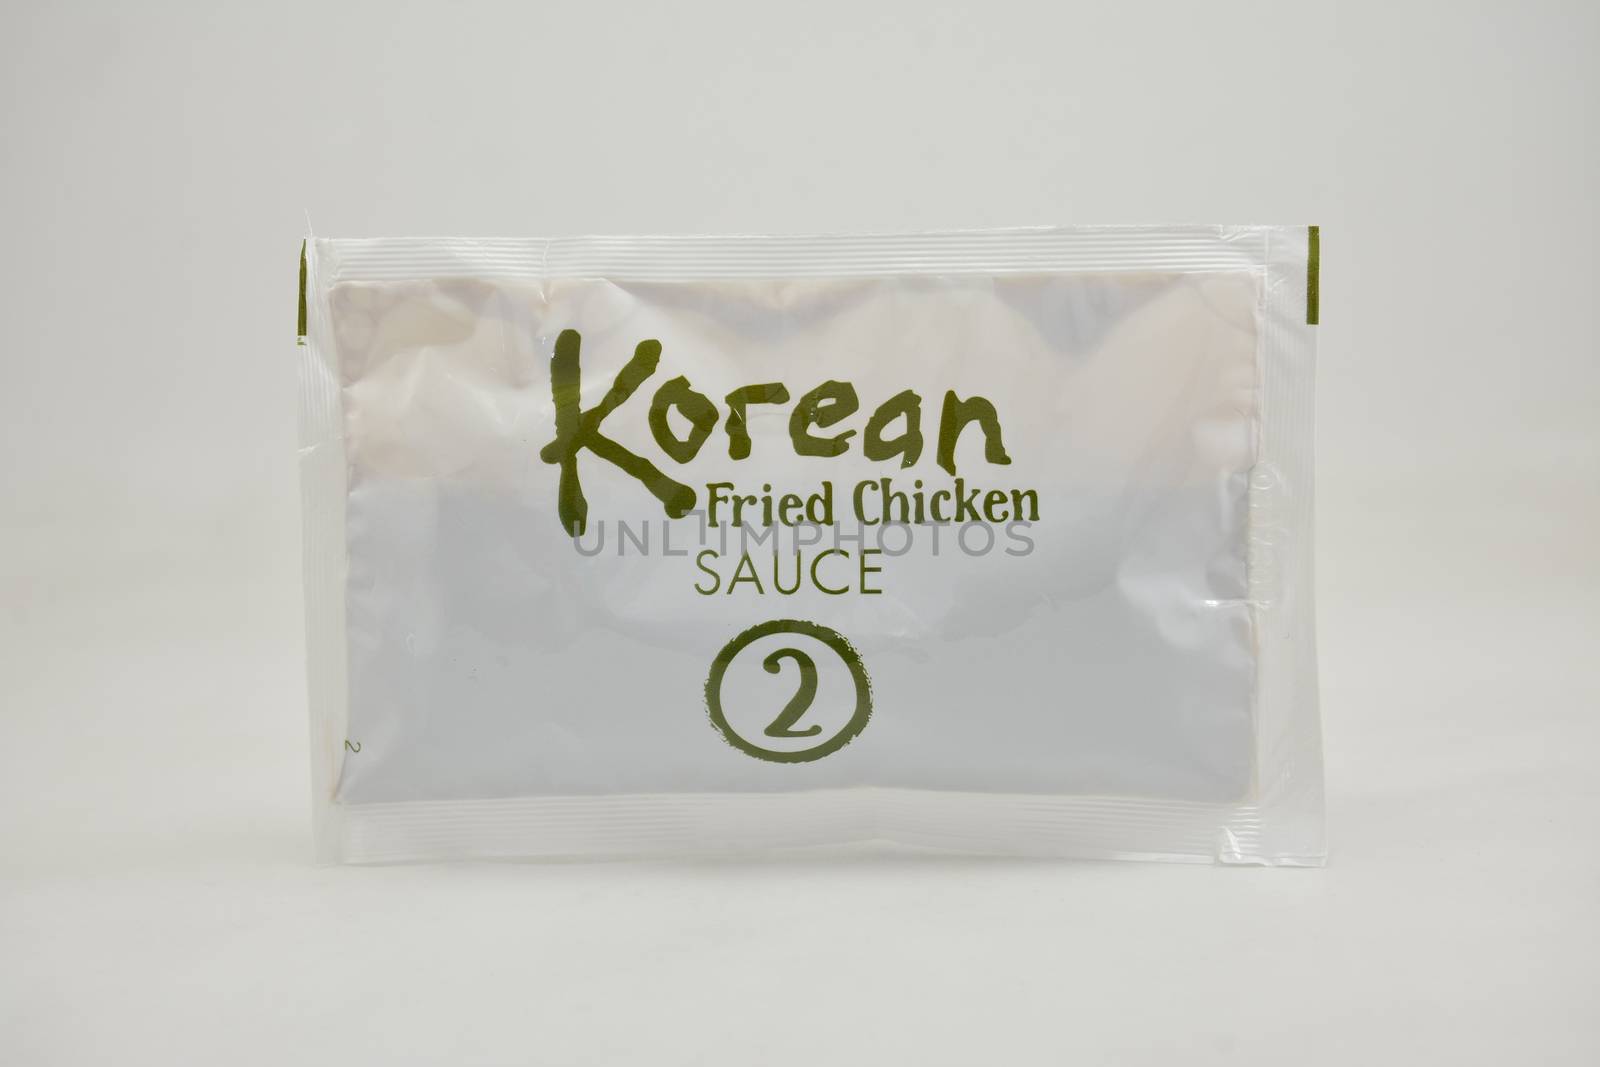 McCormick Korean fried chicken soy garlic recipe mix sauce in Ma by imwaltersy